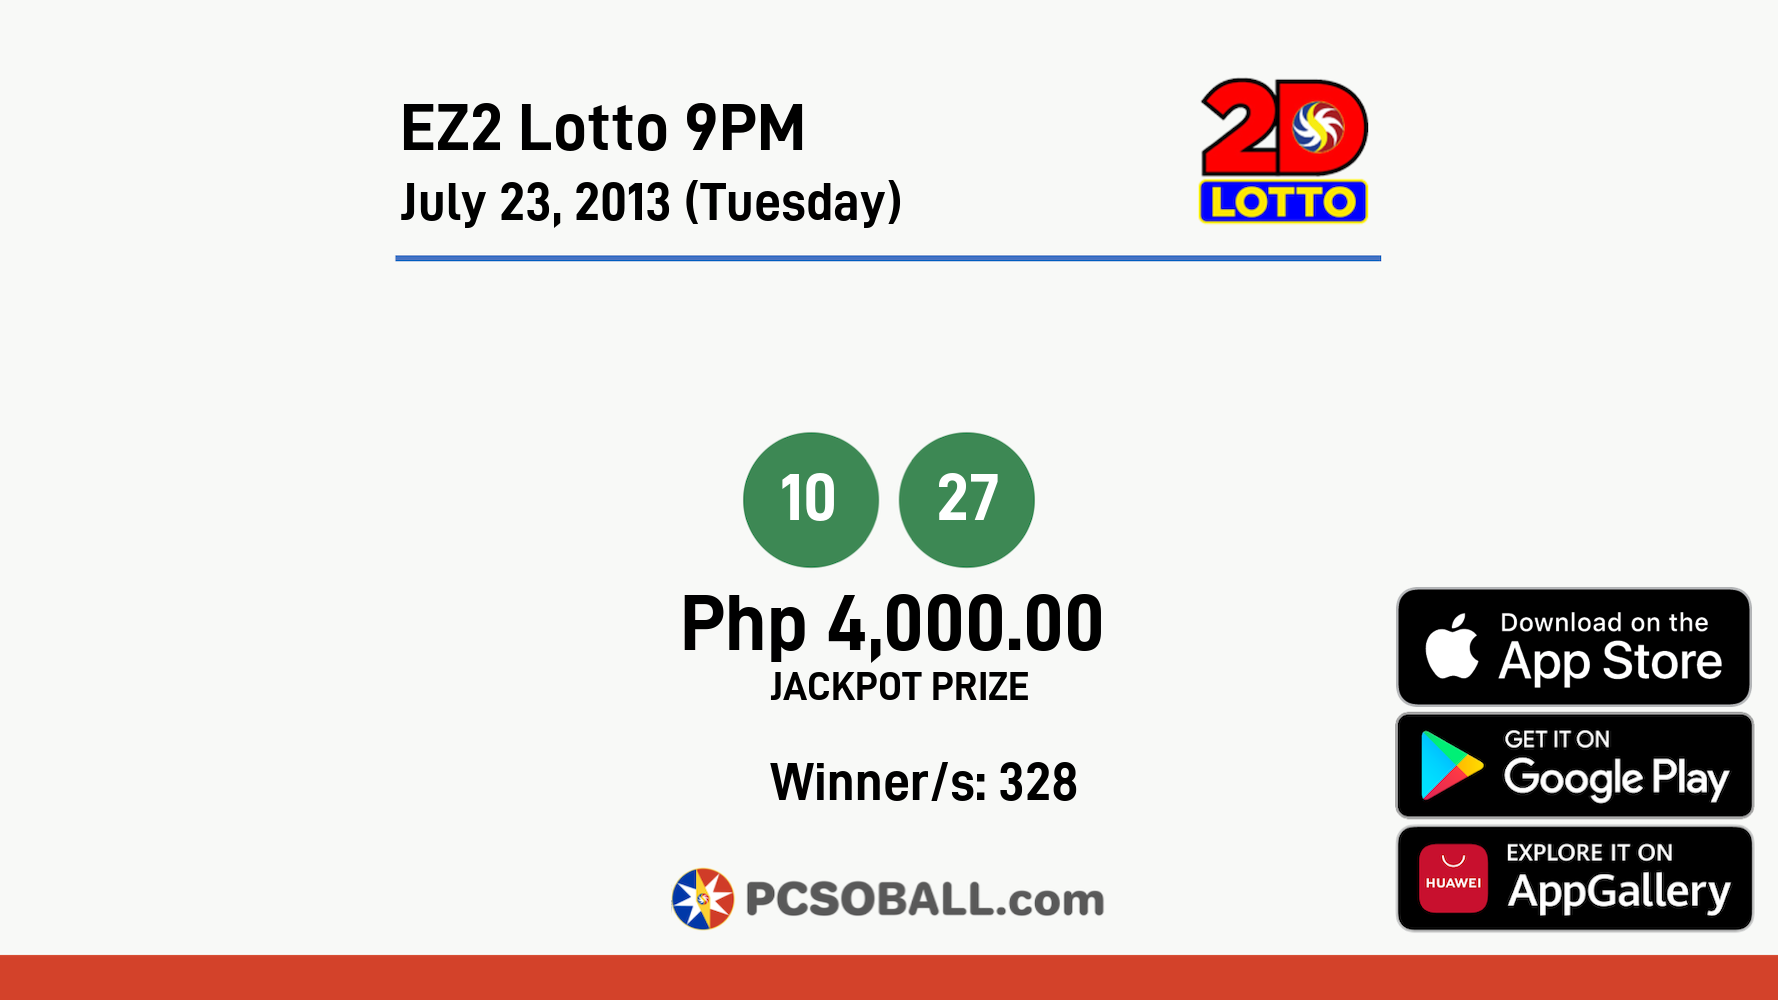 EZ2 Lotto 9PM July 23, 2013 (Tuesday) Result